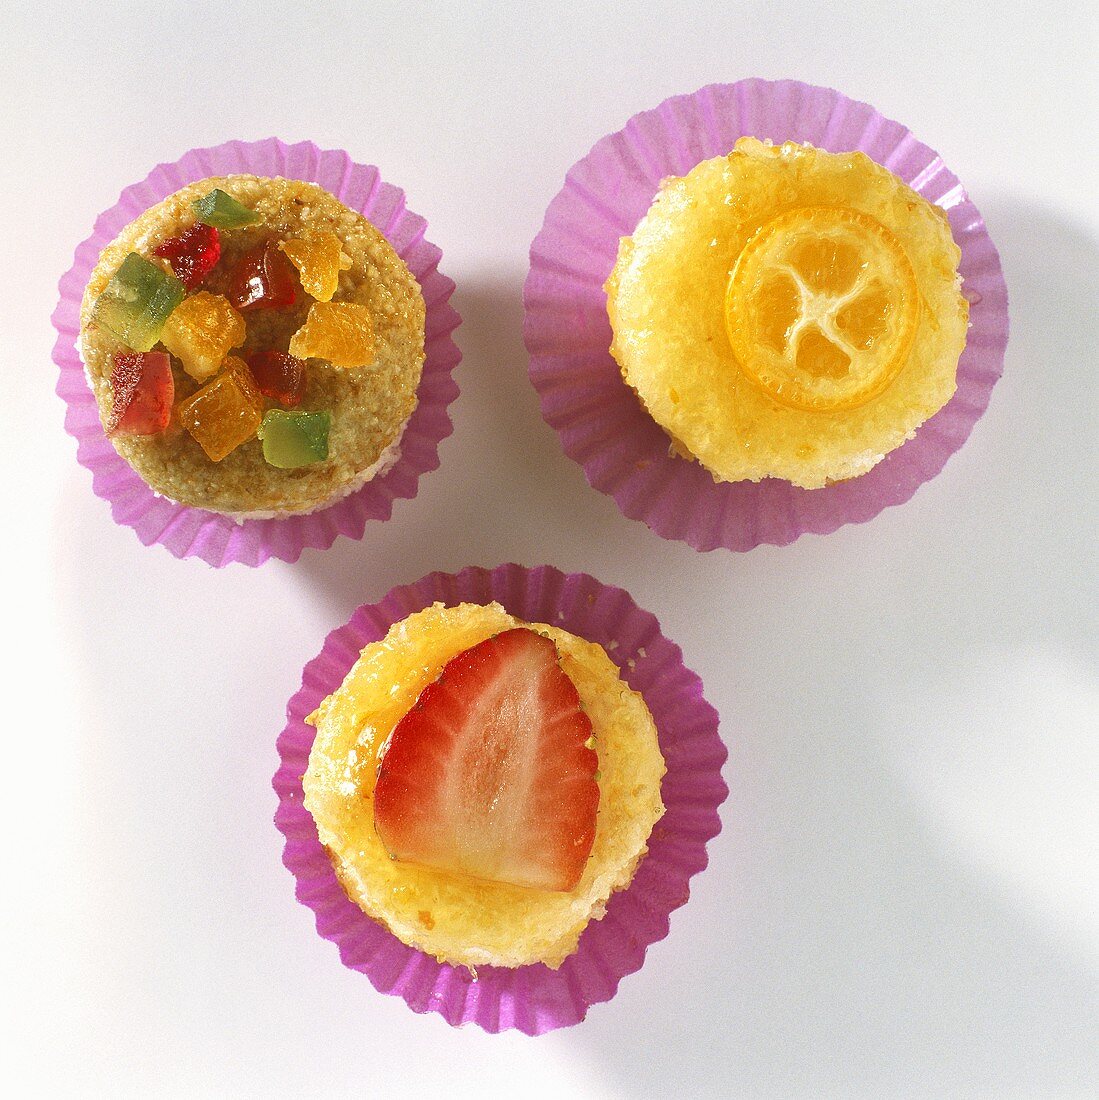 Strawberry sweet and candied fruit in paper cases